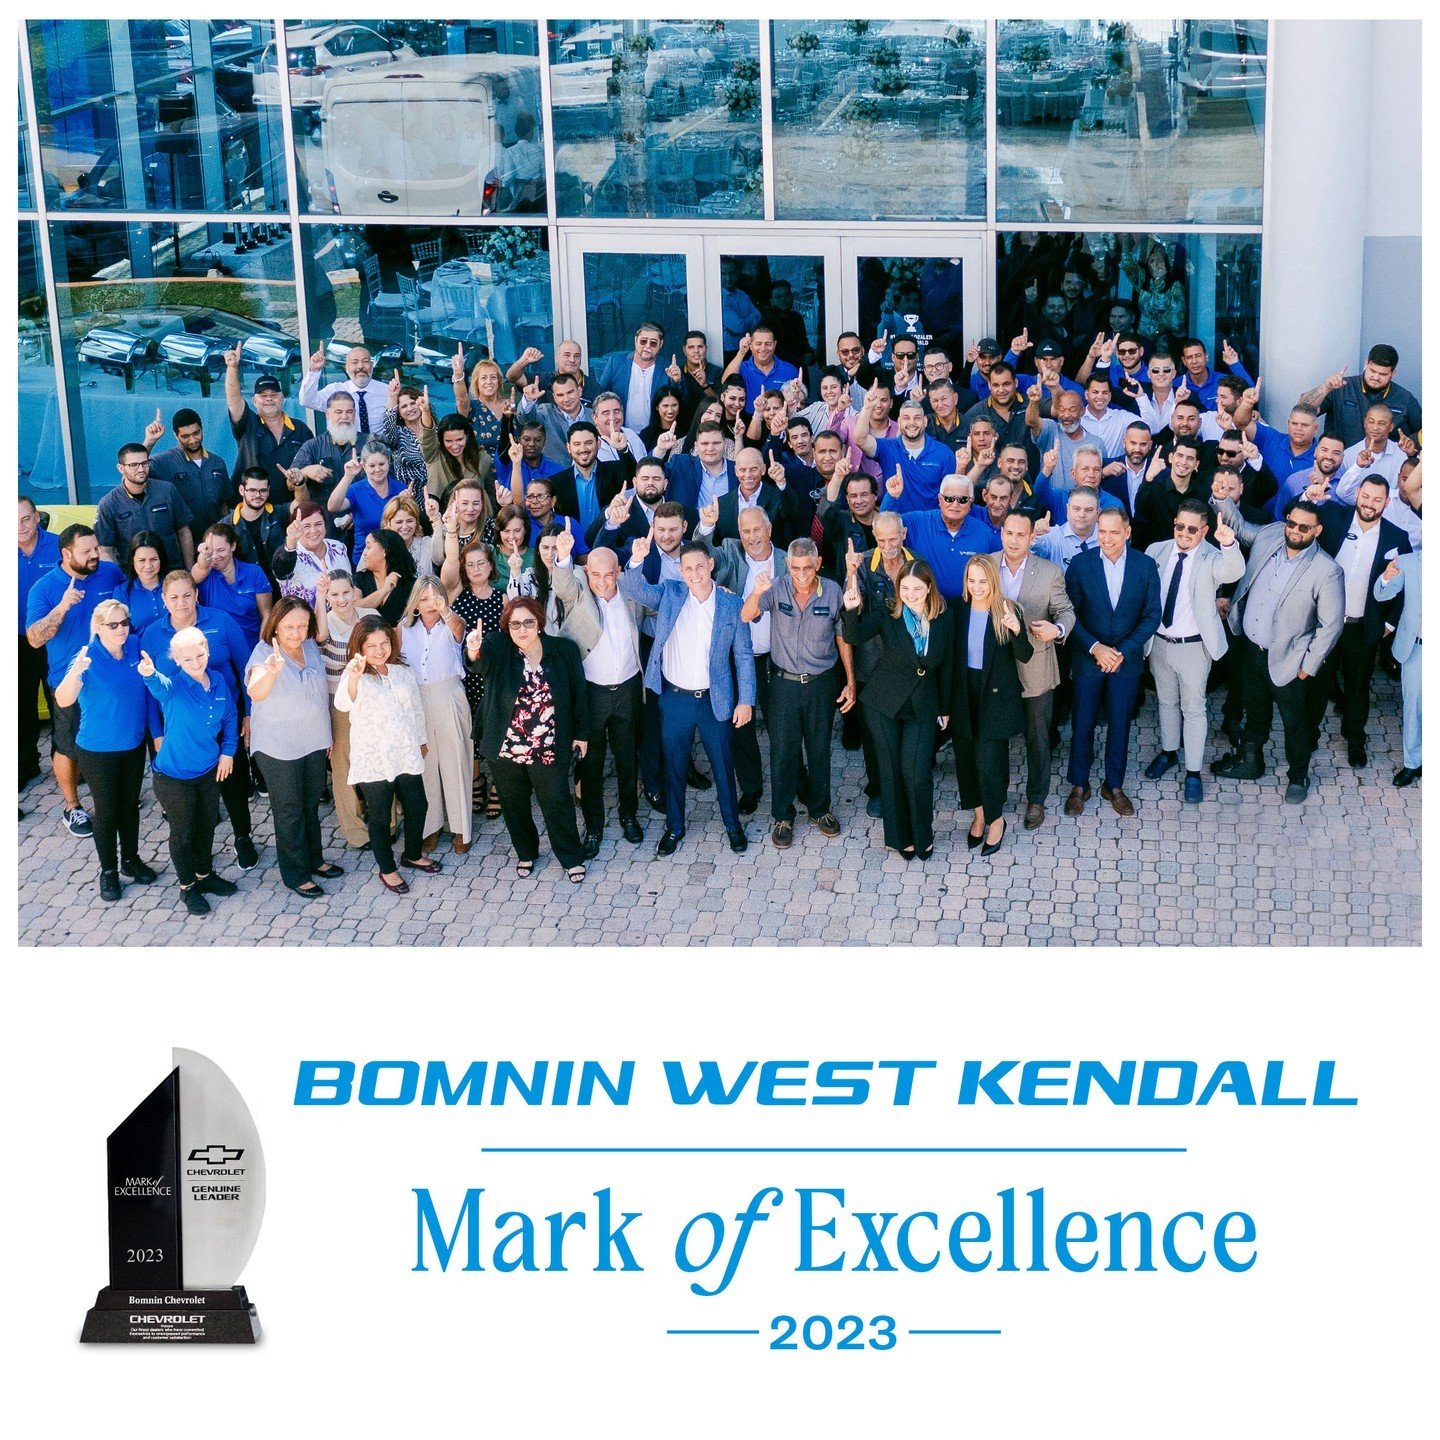 Celebrating excellence at Bomnin Chevrolet West Kendall! We're honored to receive the 2023 Mark of Excellence award, recognizing our dedication to providing top-notch service and exceeding customer expectations. 

Thank you to our incredible team and